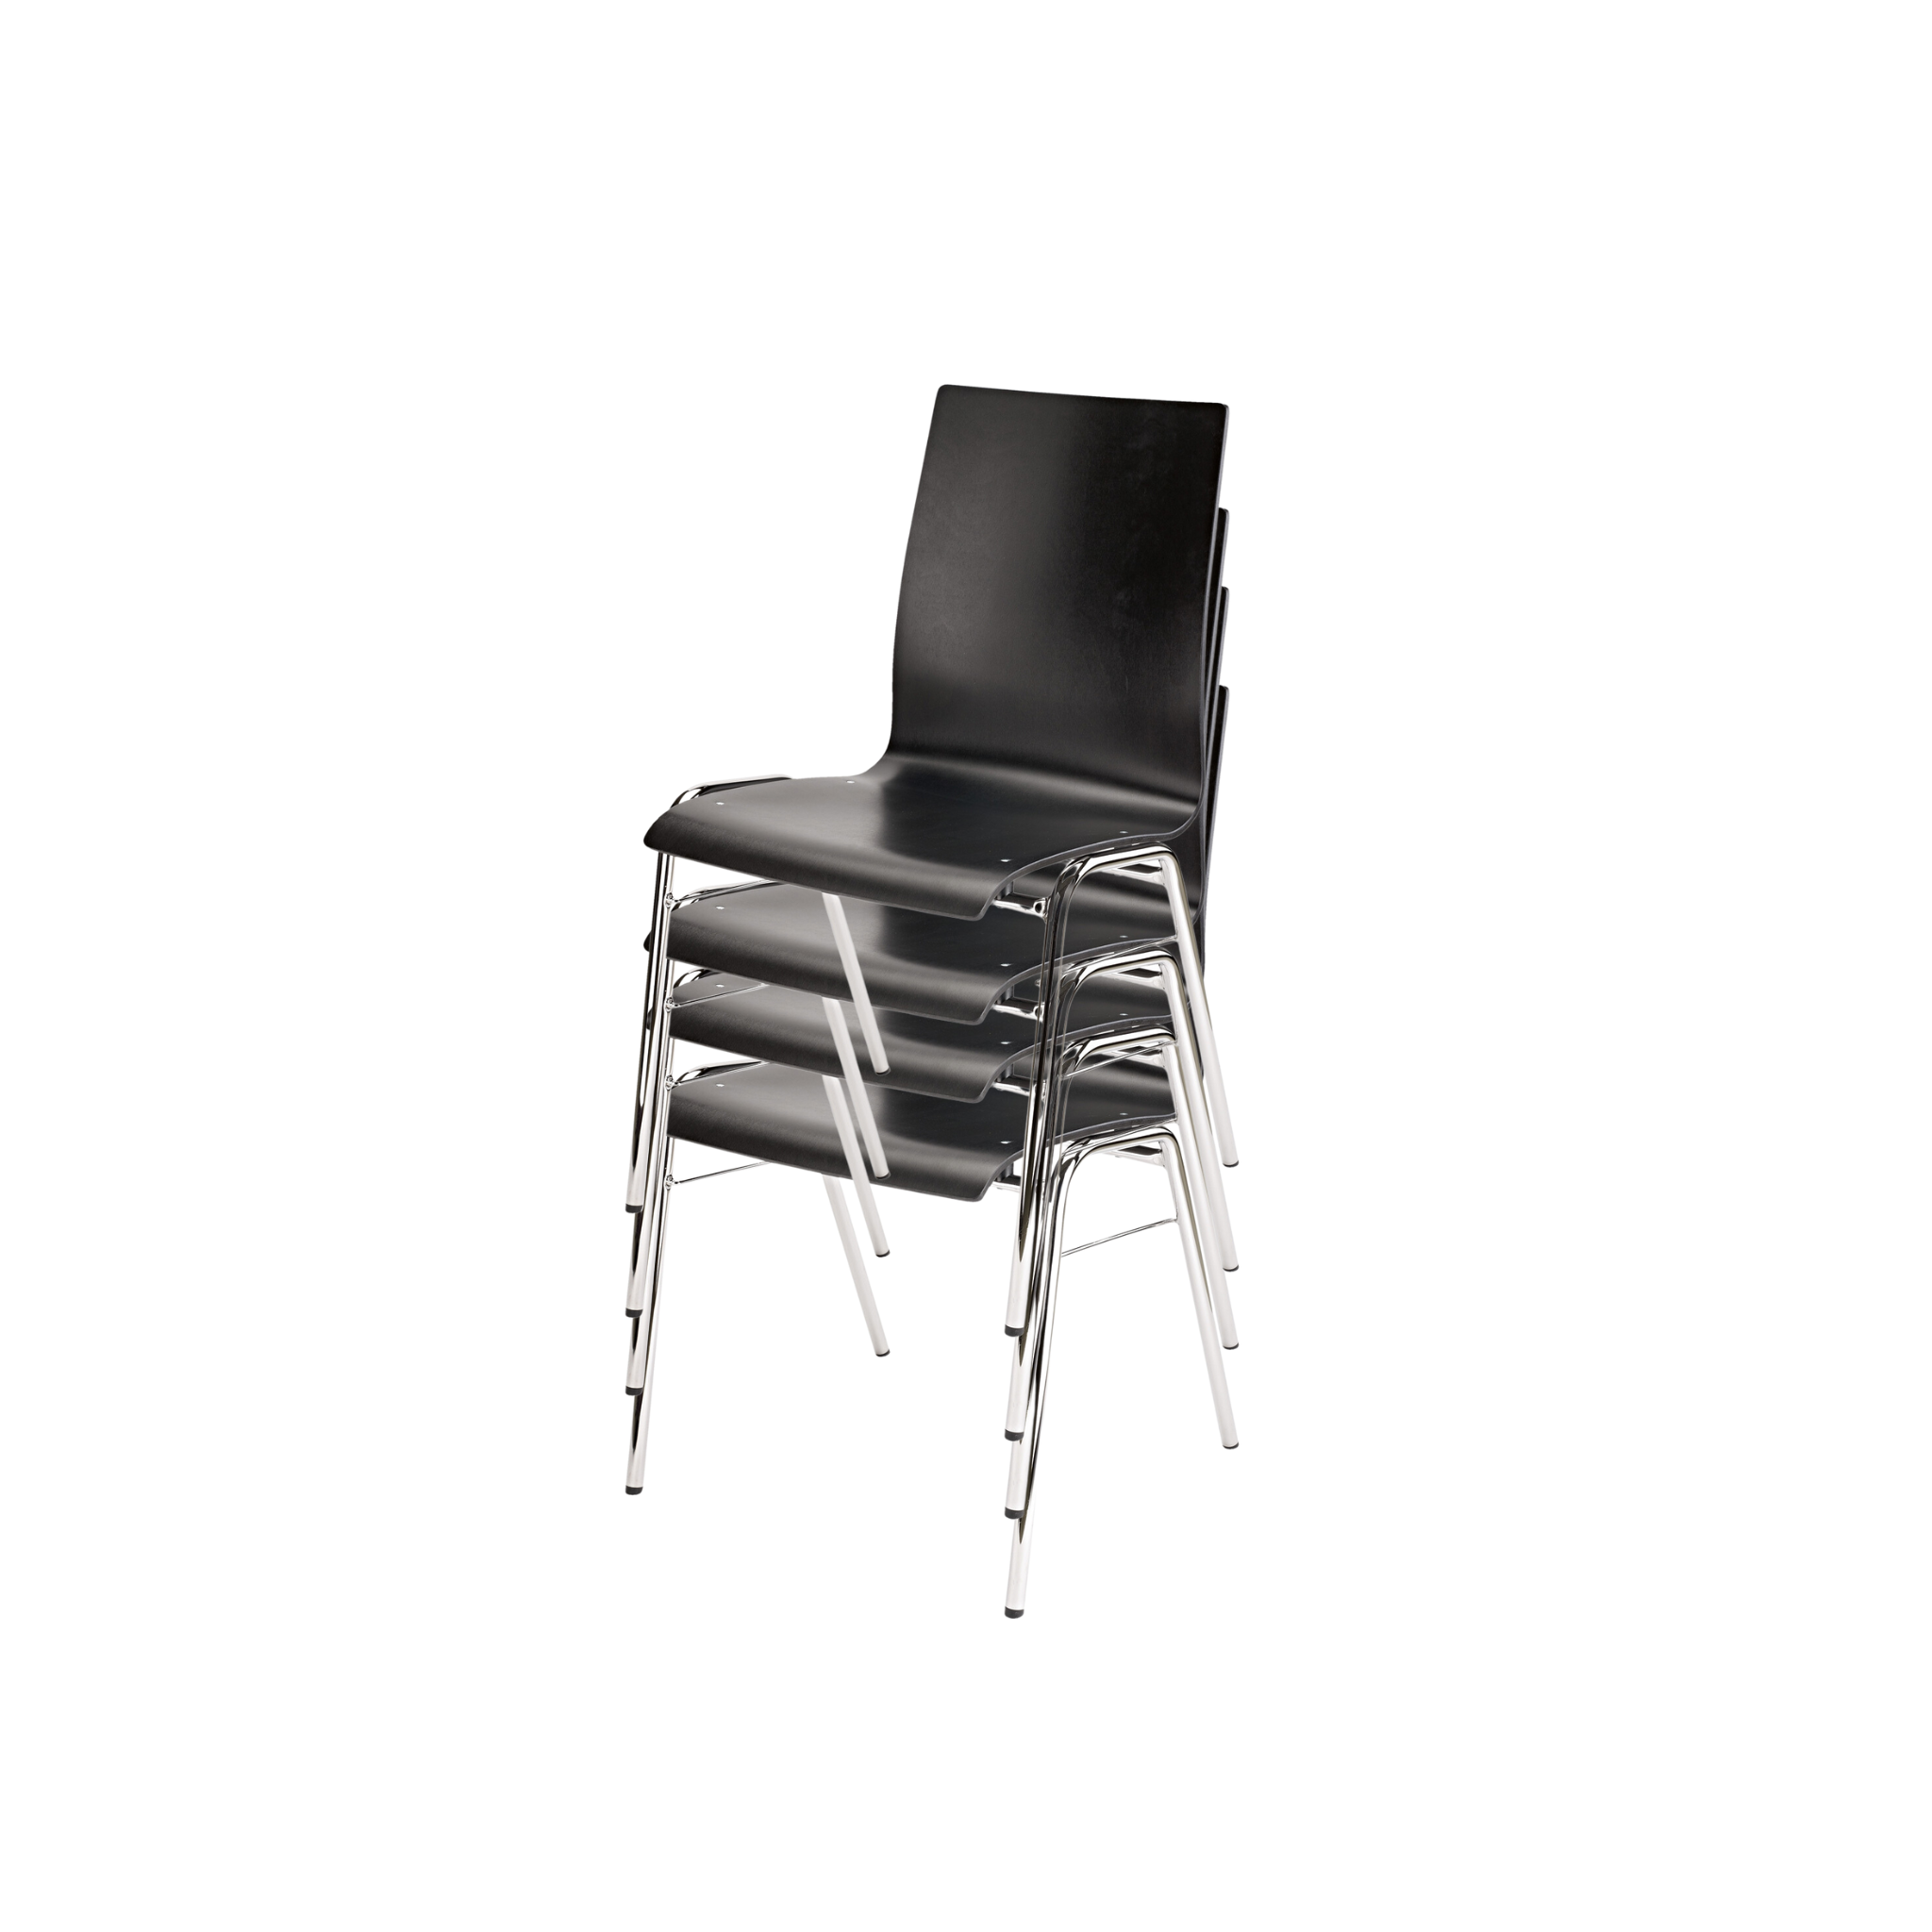 Stacking chair set of 4